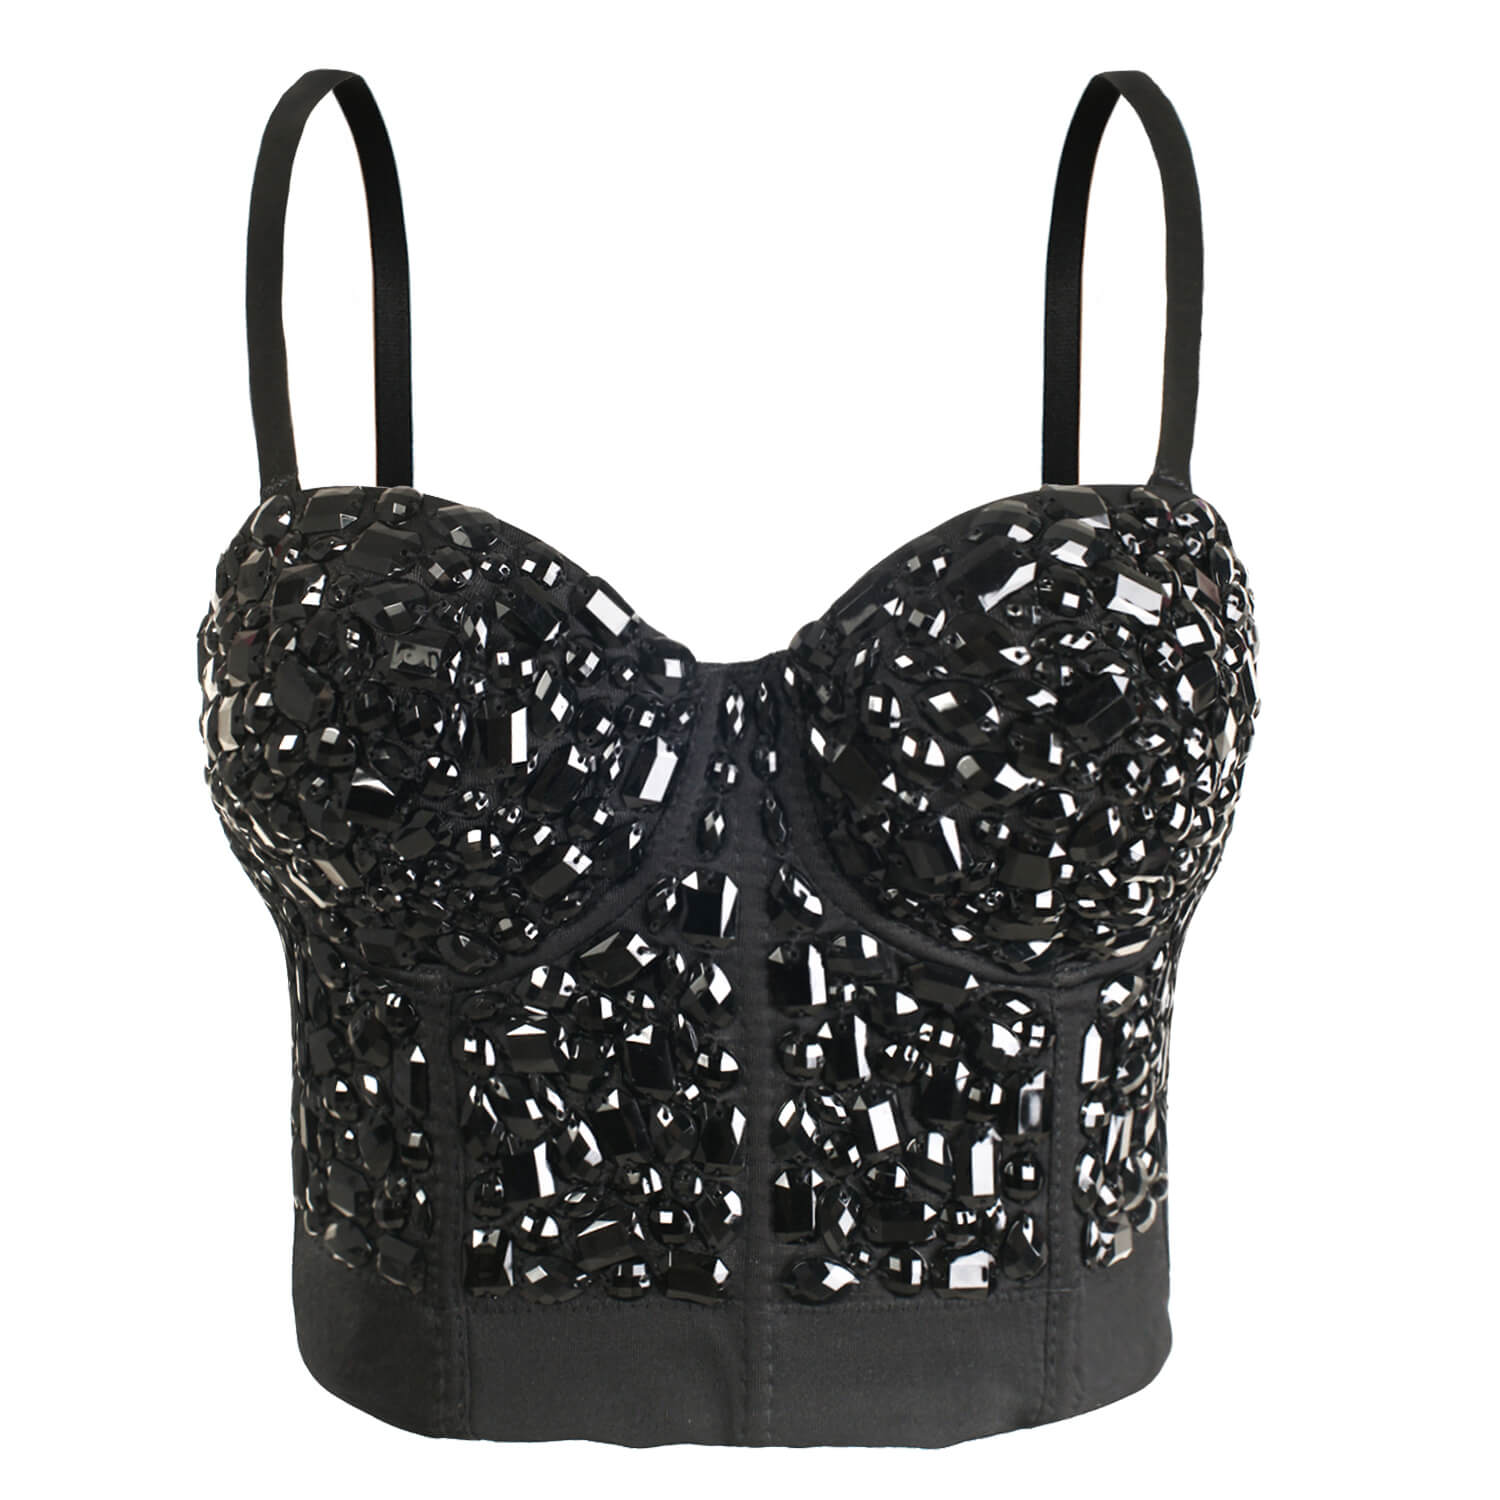 Reigning Lace Bustier Top  Lace crop tops, Crop tops, Lace bustier top